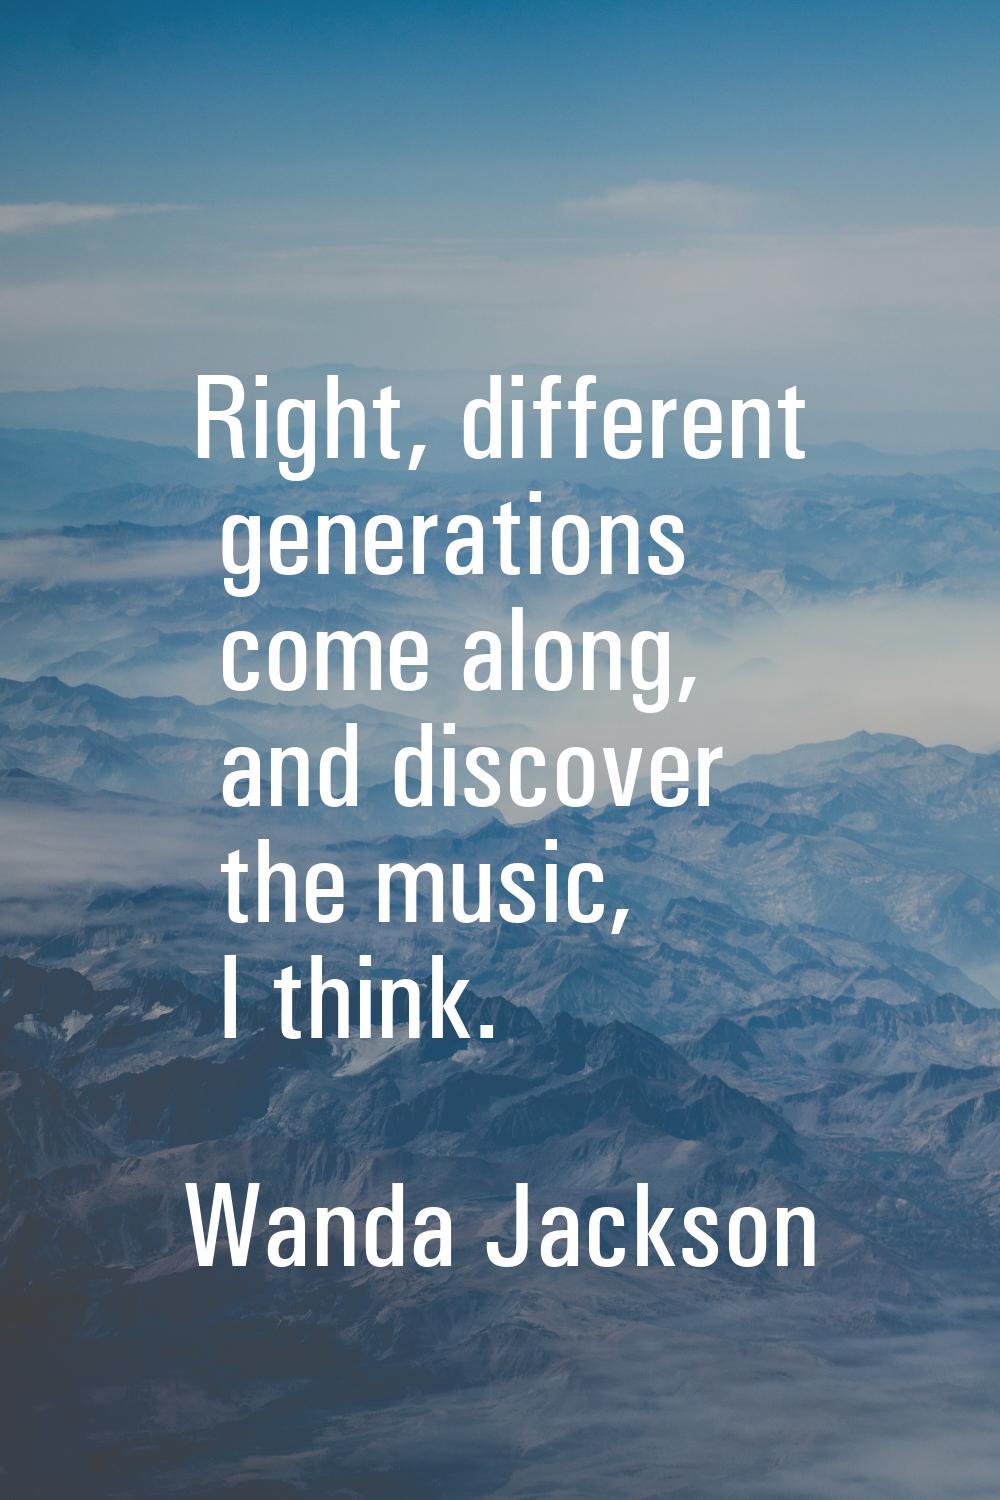 Right, different generations come along, and discover the music, I think.